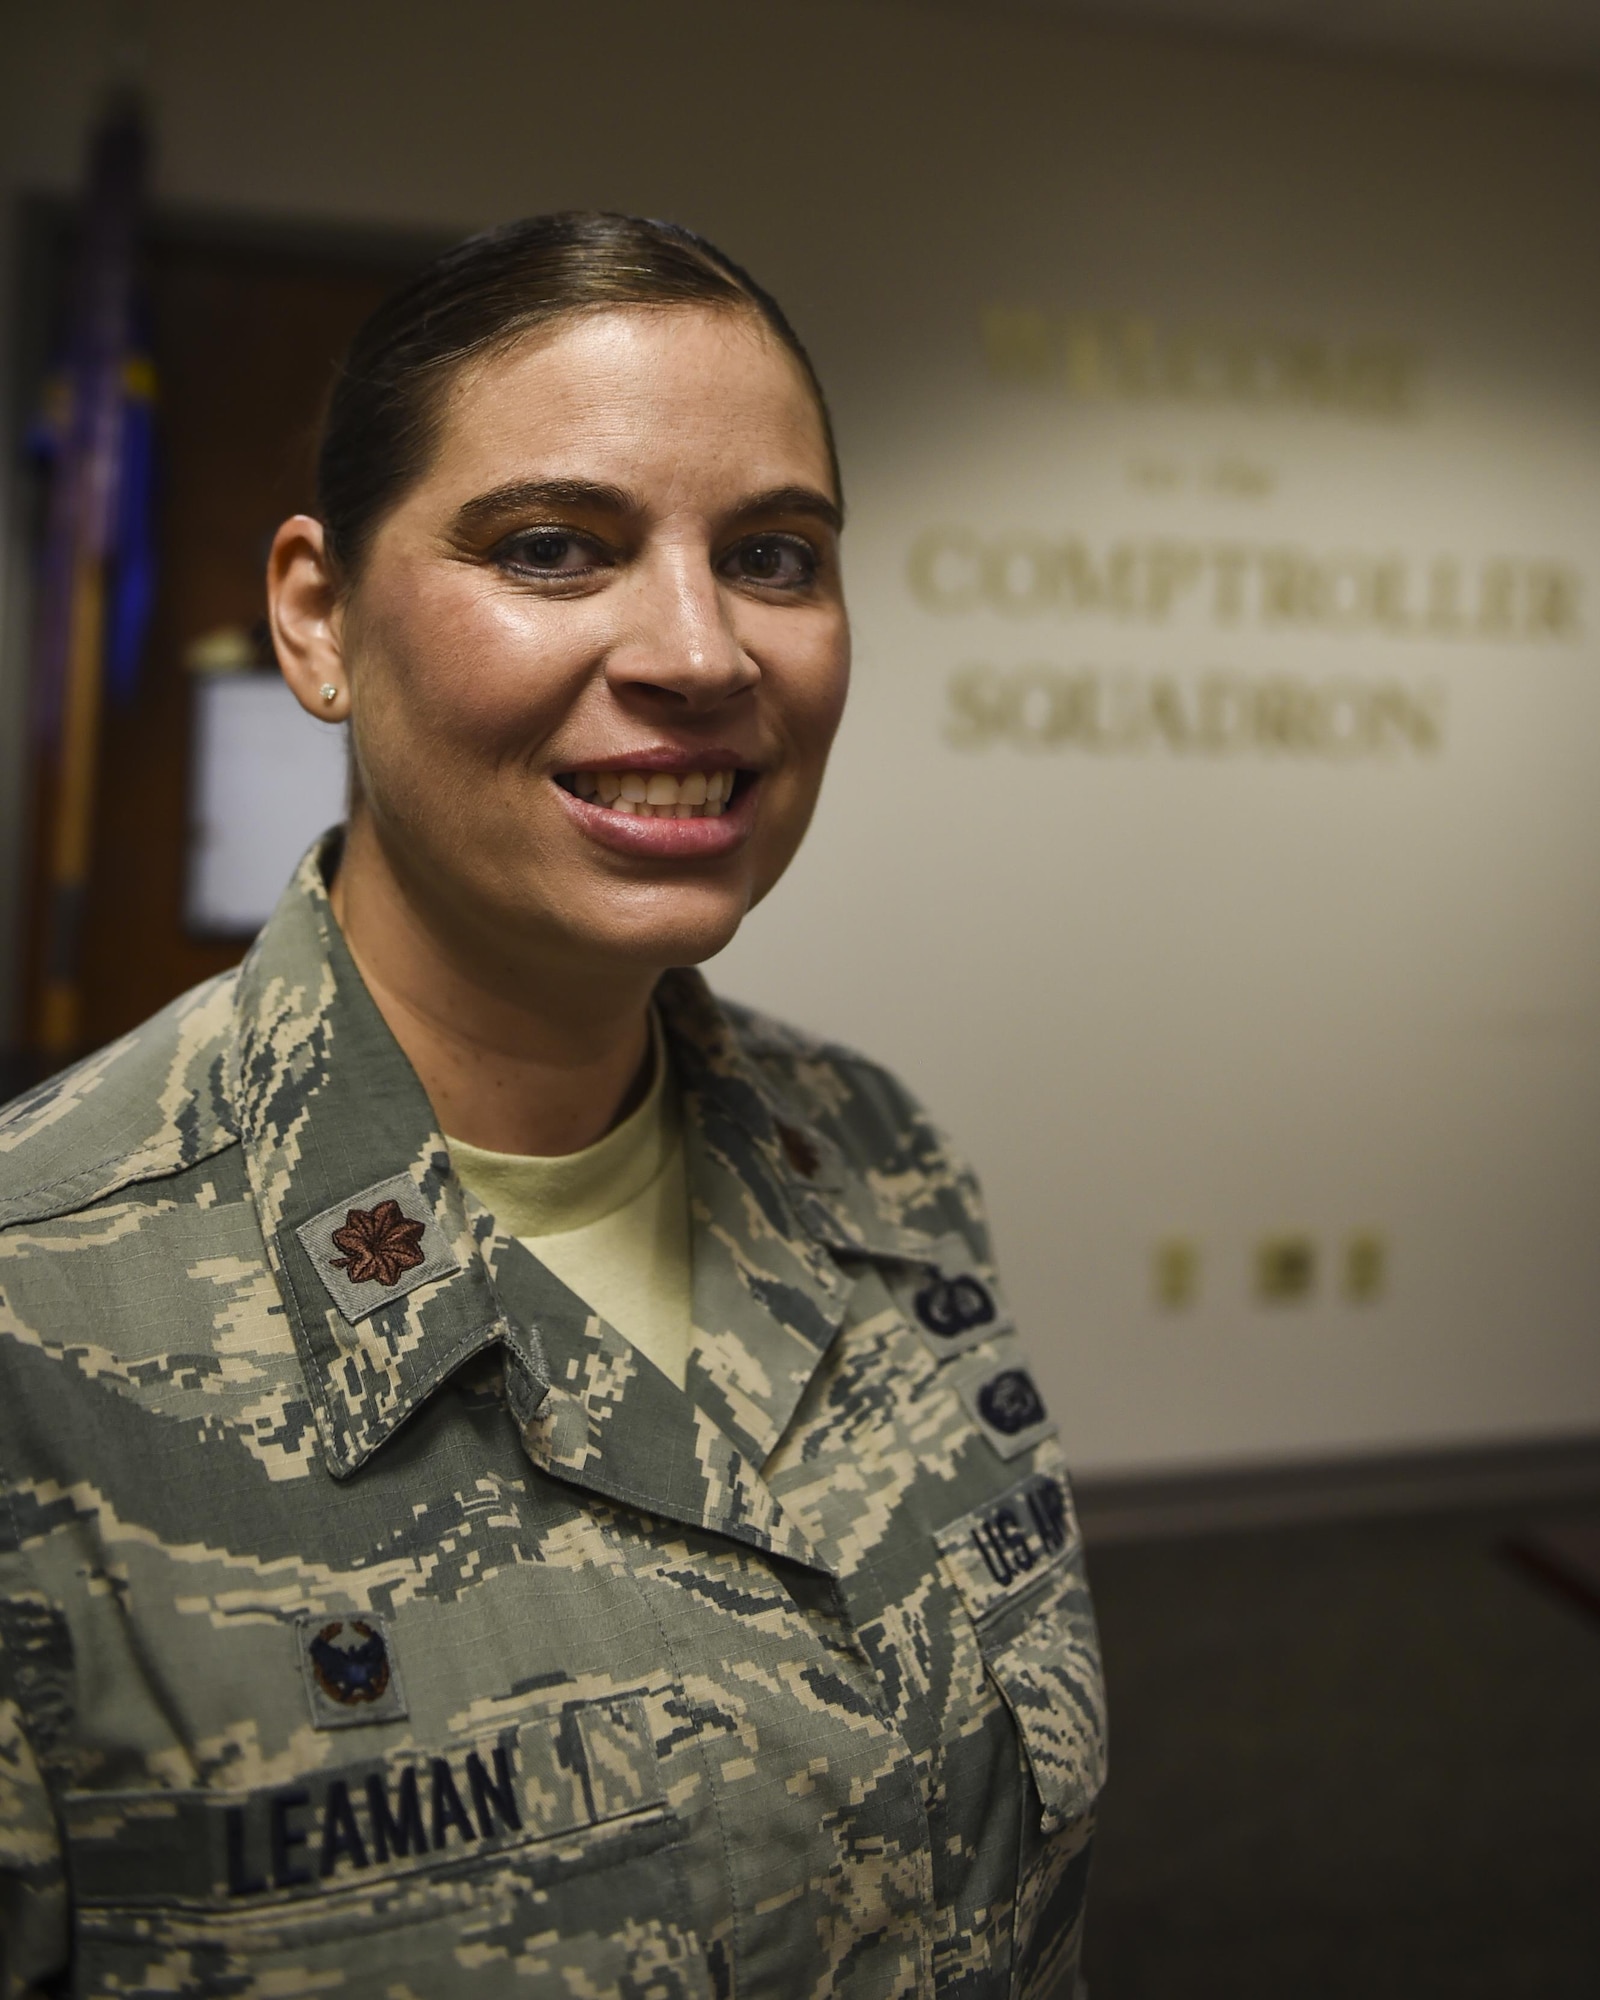 Maj. Krista Leaman is the commander of the 1st Special Operations Wing Comptroller Squadron, a 1st Special Operations Wing staff agency, that manages the financial business of Hurlburt Field, Fla. The 1st SOCPTS provides peacetime and wartime world-wide support to all members, both active and retired, of the uniformed services, other members of the Department of Defense components, as well as civilian employees. (U.S. Air Force photo by Senior Airman Christopher Callaway)